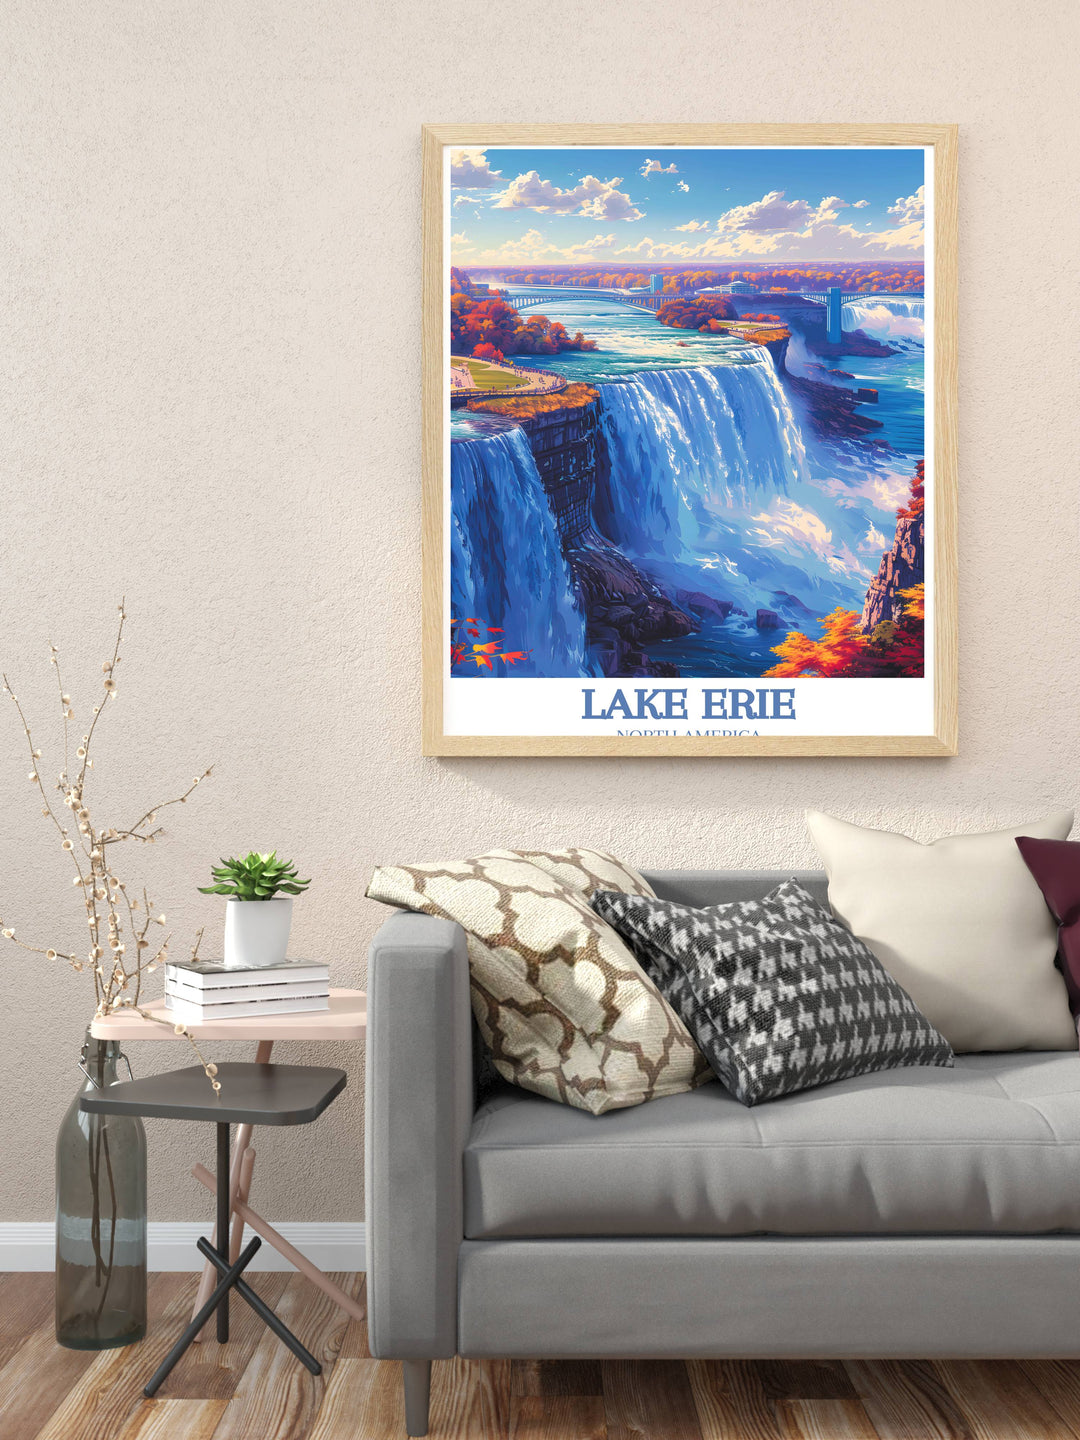 High quality print capturing the serene sunrise over Lake Erie, suitable for offices or living spaces seeking calm vibes.